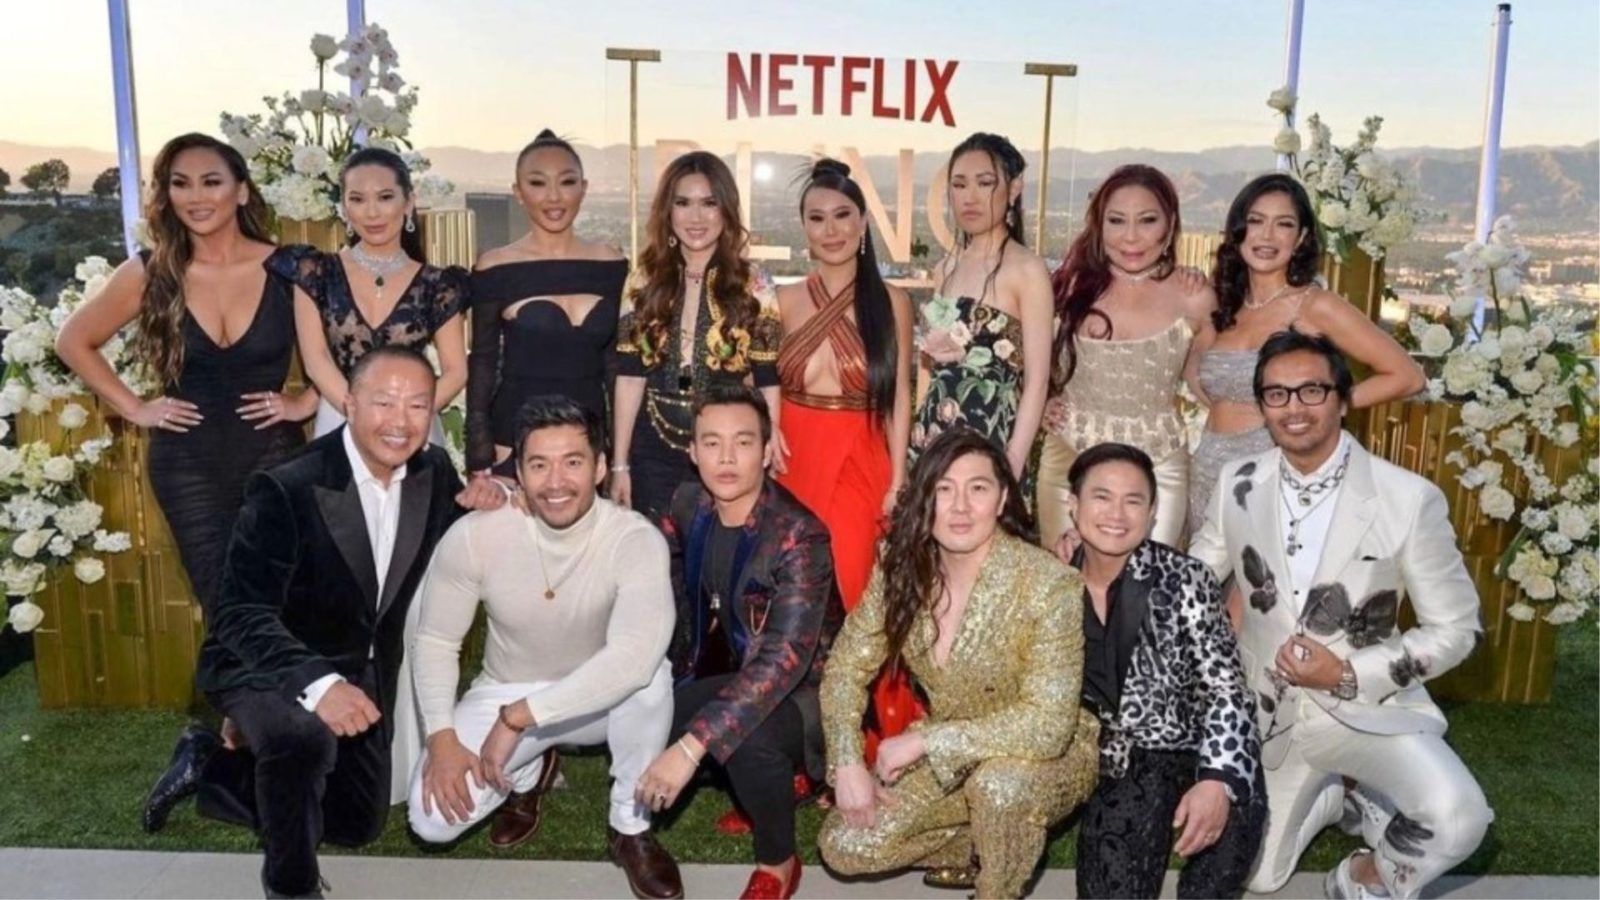 ‘Bling Empire’ is set for season 3 and a possible spin-off